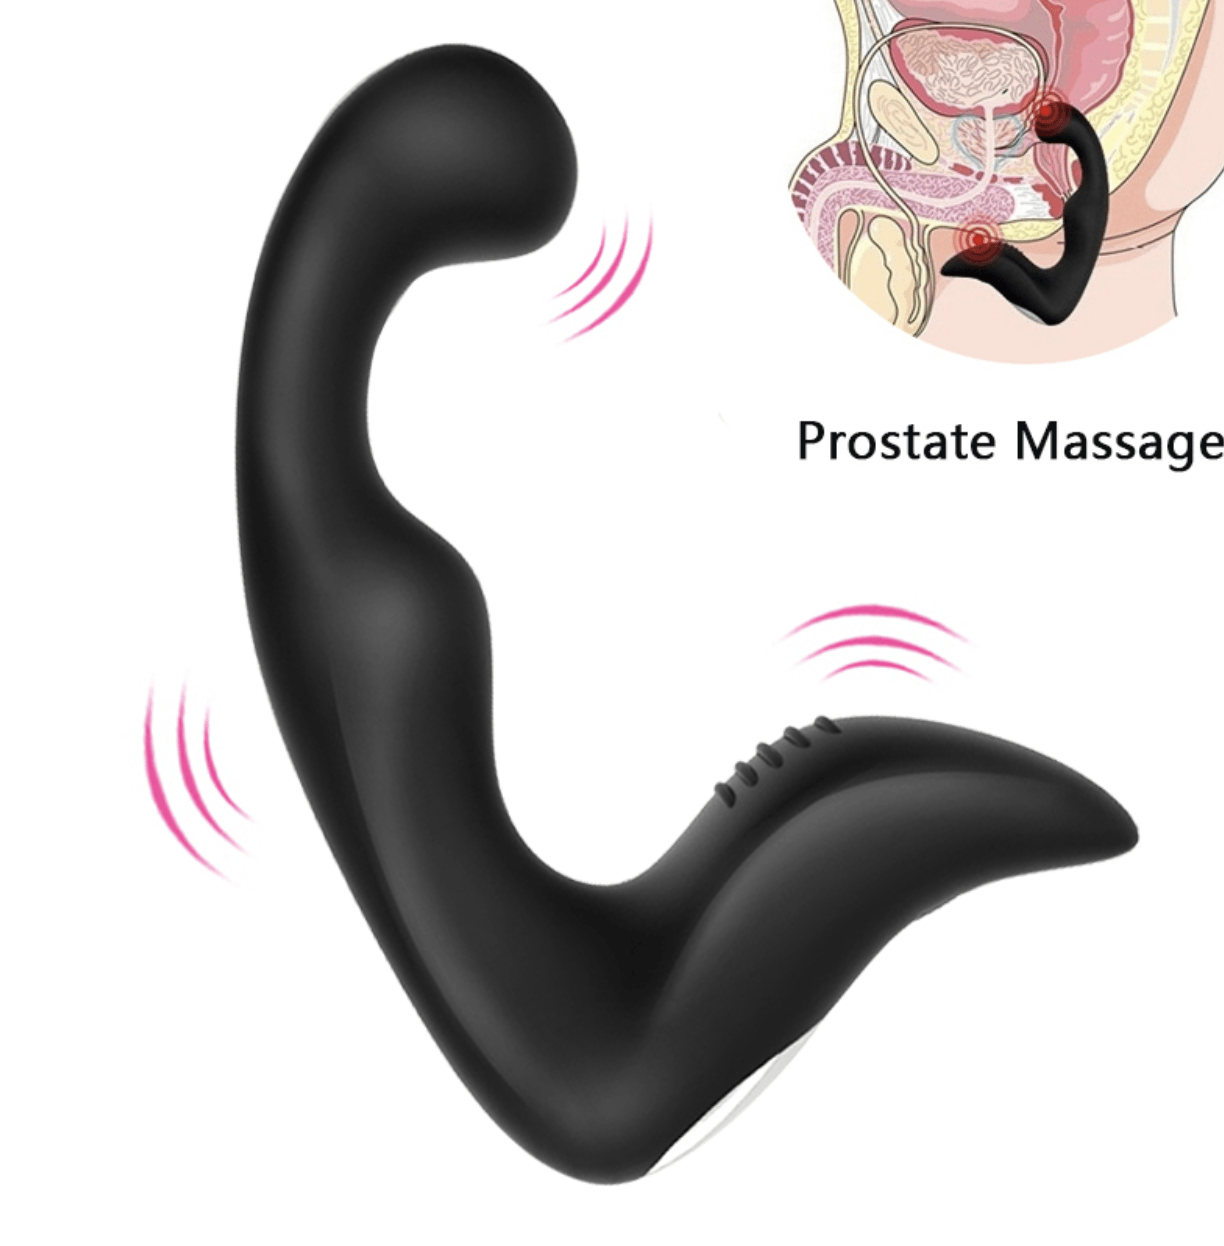 Prostate Massager - GAYS+ Adult Toy Store - Cheap prices from US$6.99